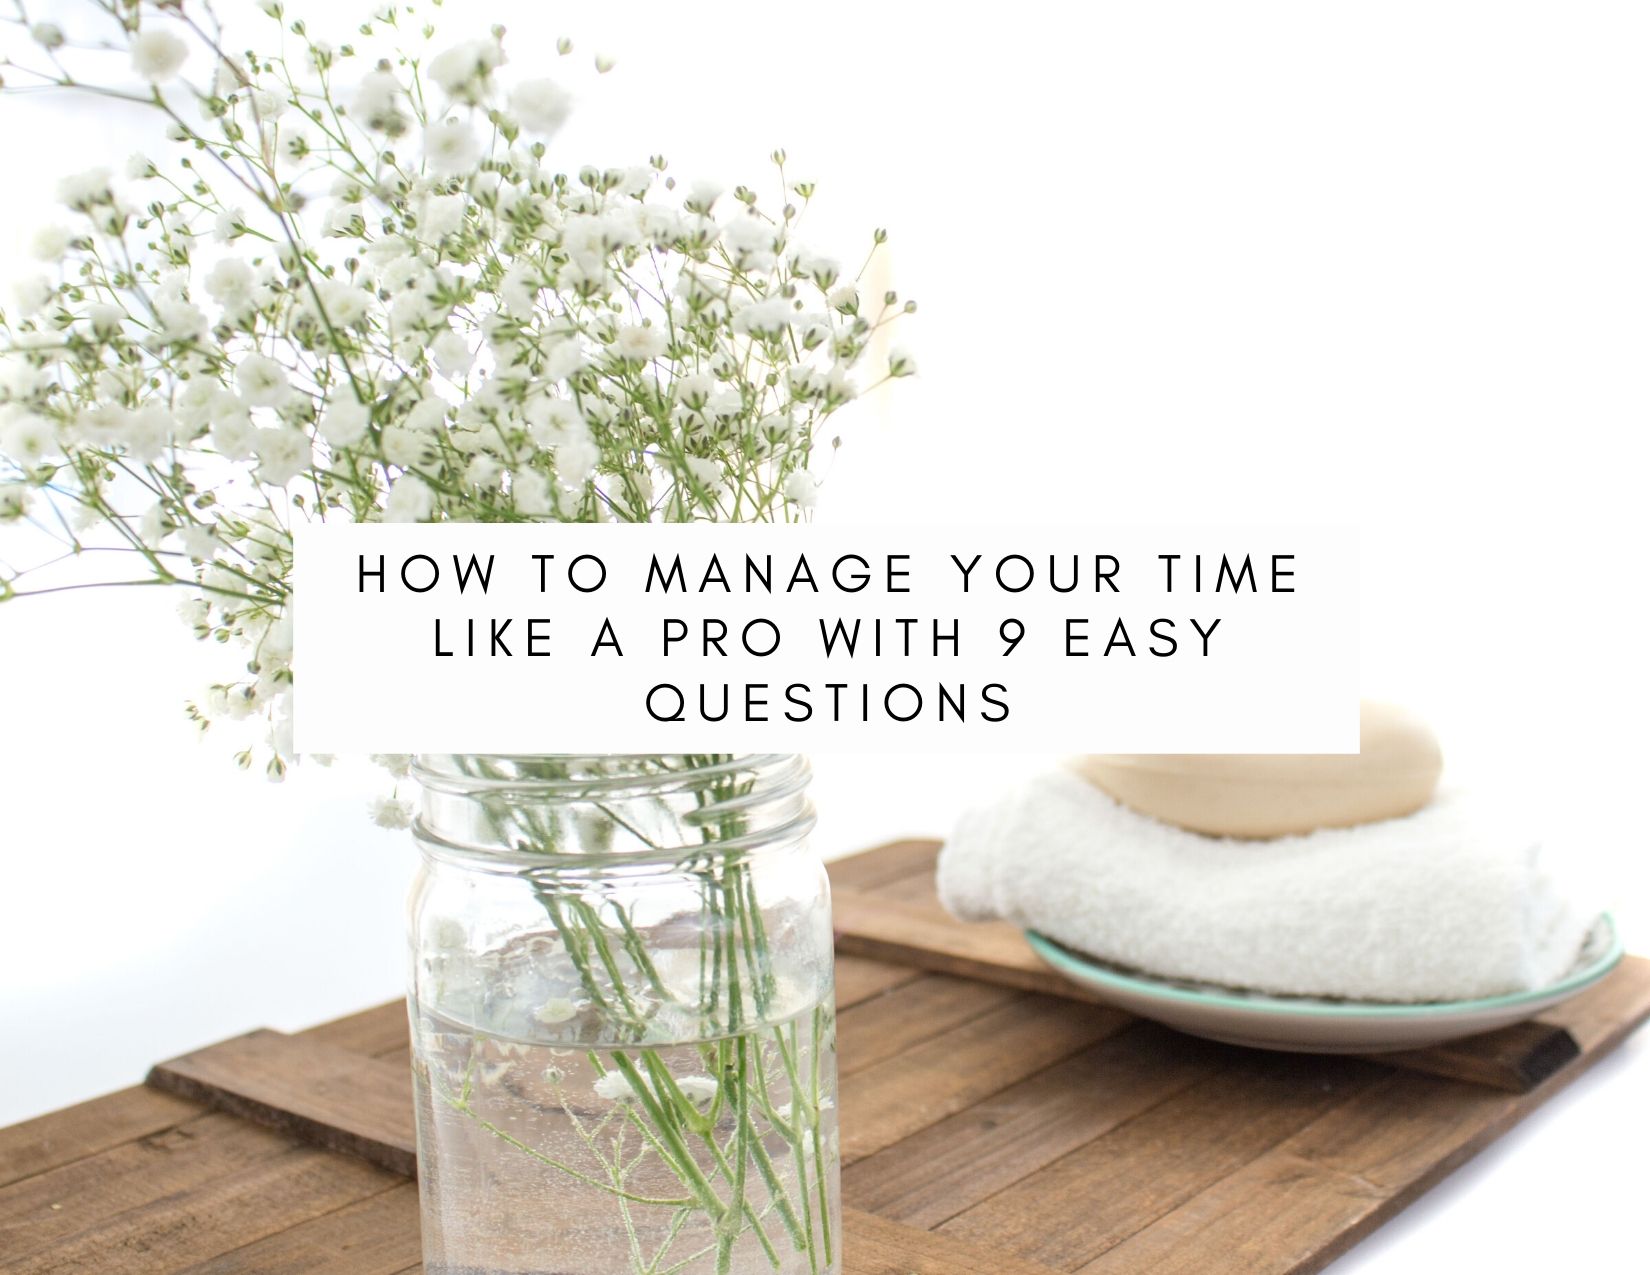 How To Manage Your Time Like A Pro With 9 Easy Questions